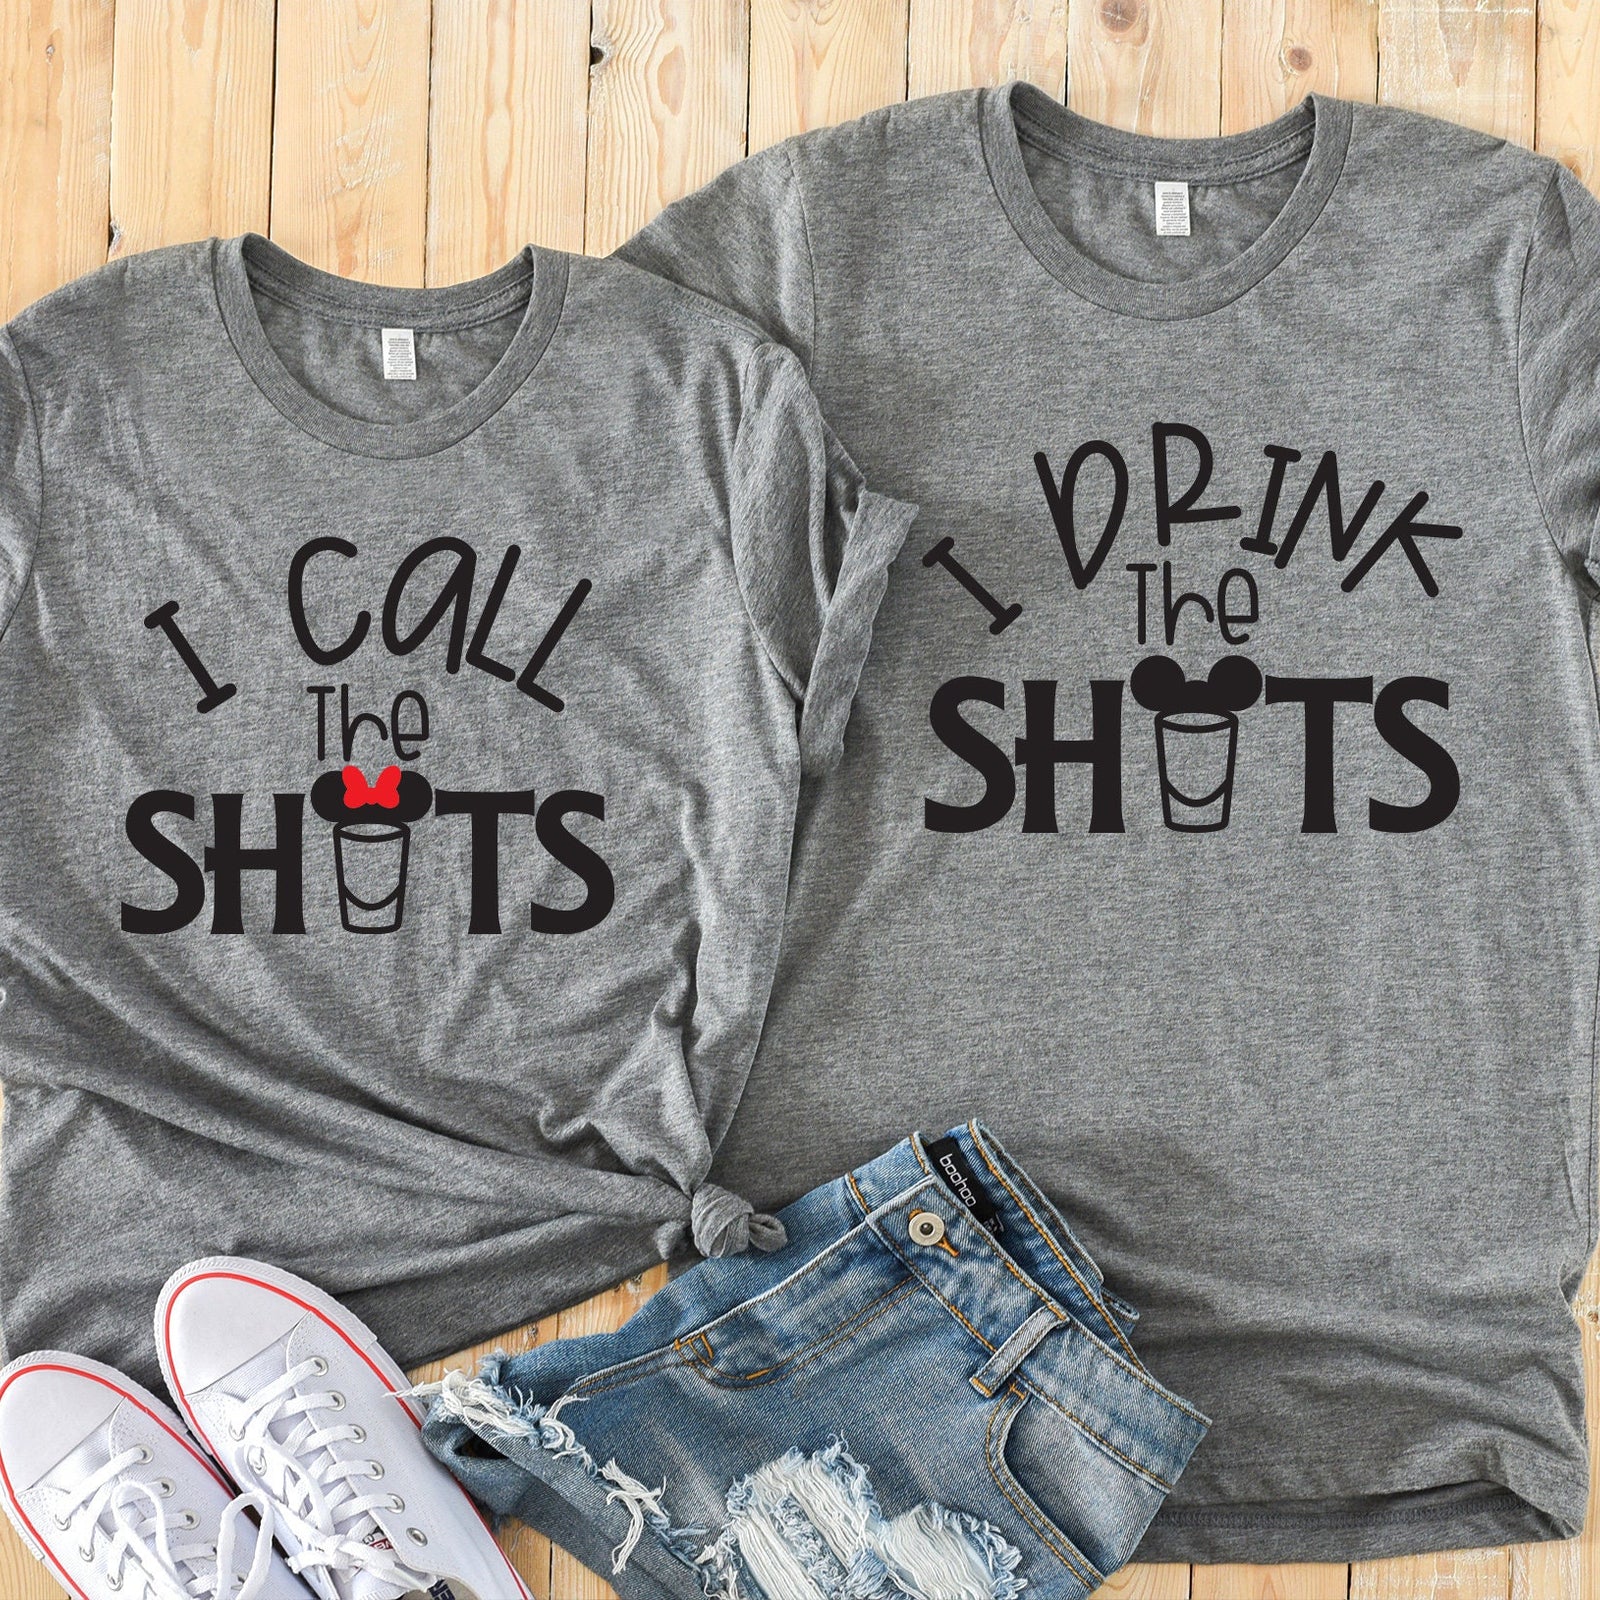 I Drink the Shots and I Call the Shots Matching Disney Couples Shirts - Minnie and Mickey Adult T Shirts- Drinking Bar